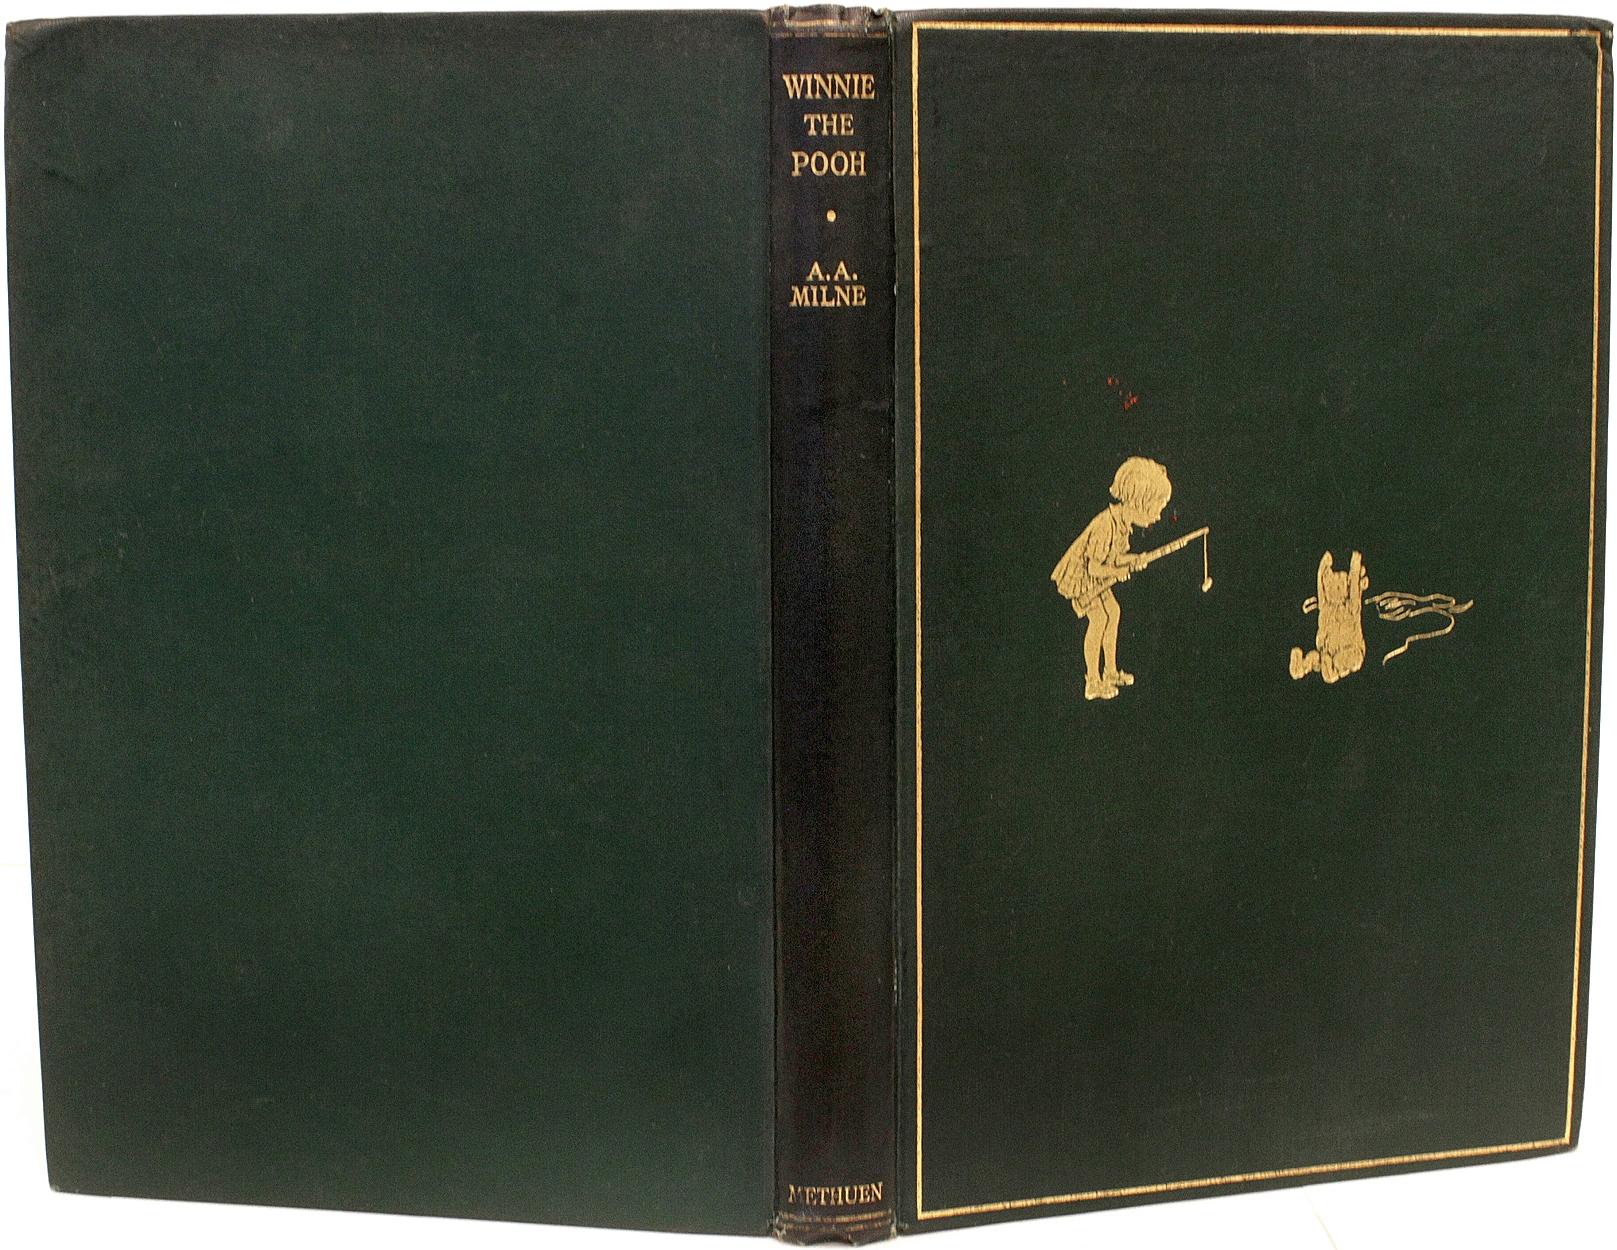 AUTHOR: MILNE, A. A.

TITLE: Winnie The Pooh.

PUBLISHER: London: Methuen & Co. Ltd., 1926.

DESCRIPTION: FIRST EDITION FIRST PRINTING. 1 volume, illustrated by E. H. Shephard. Bound in the publisher's original gilt stamped green cloth, top edge